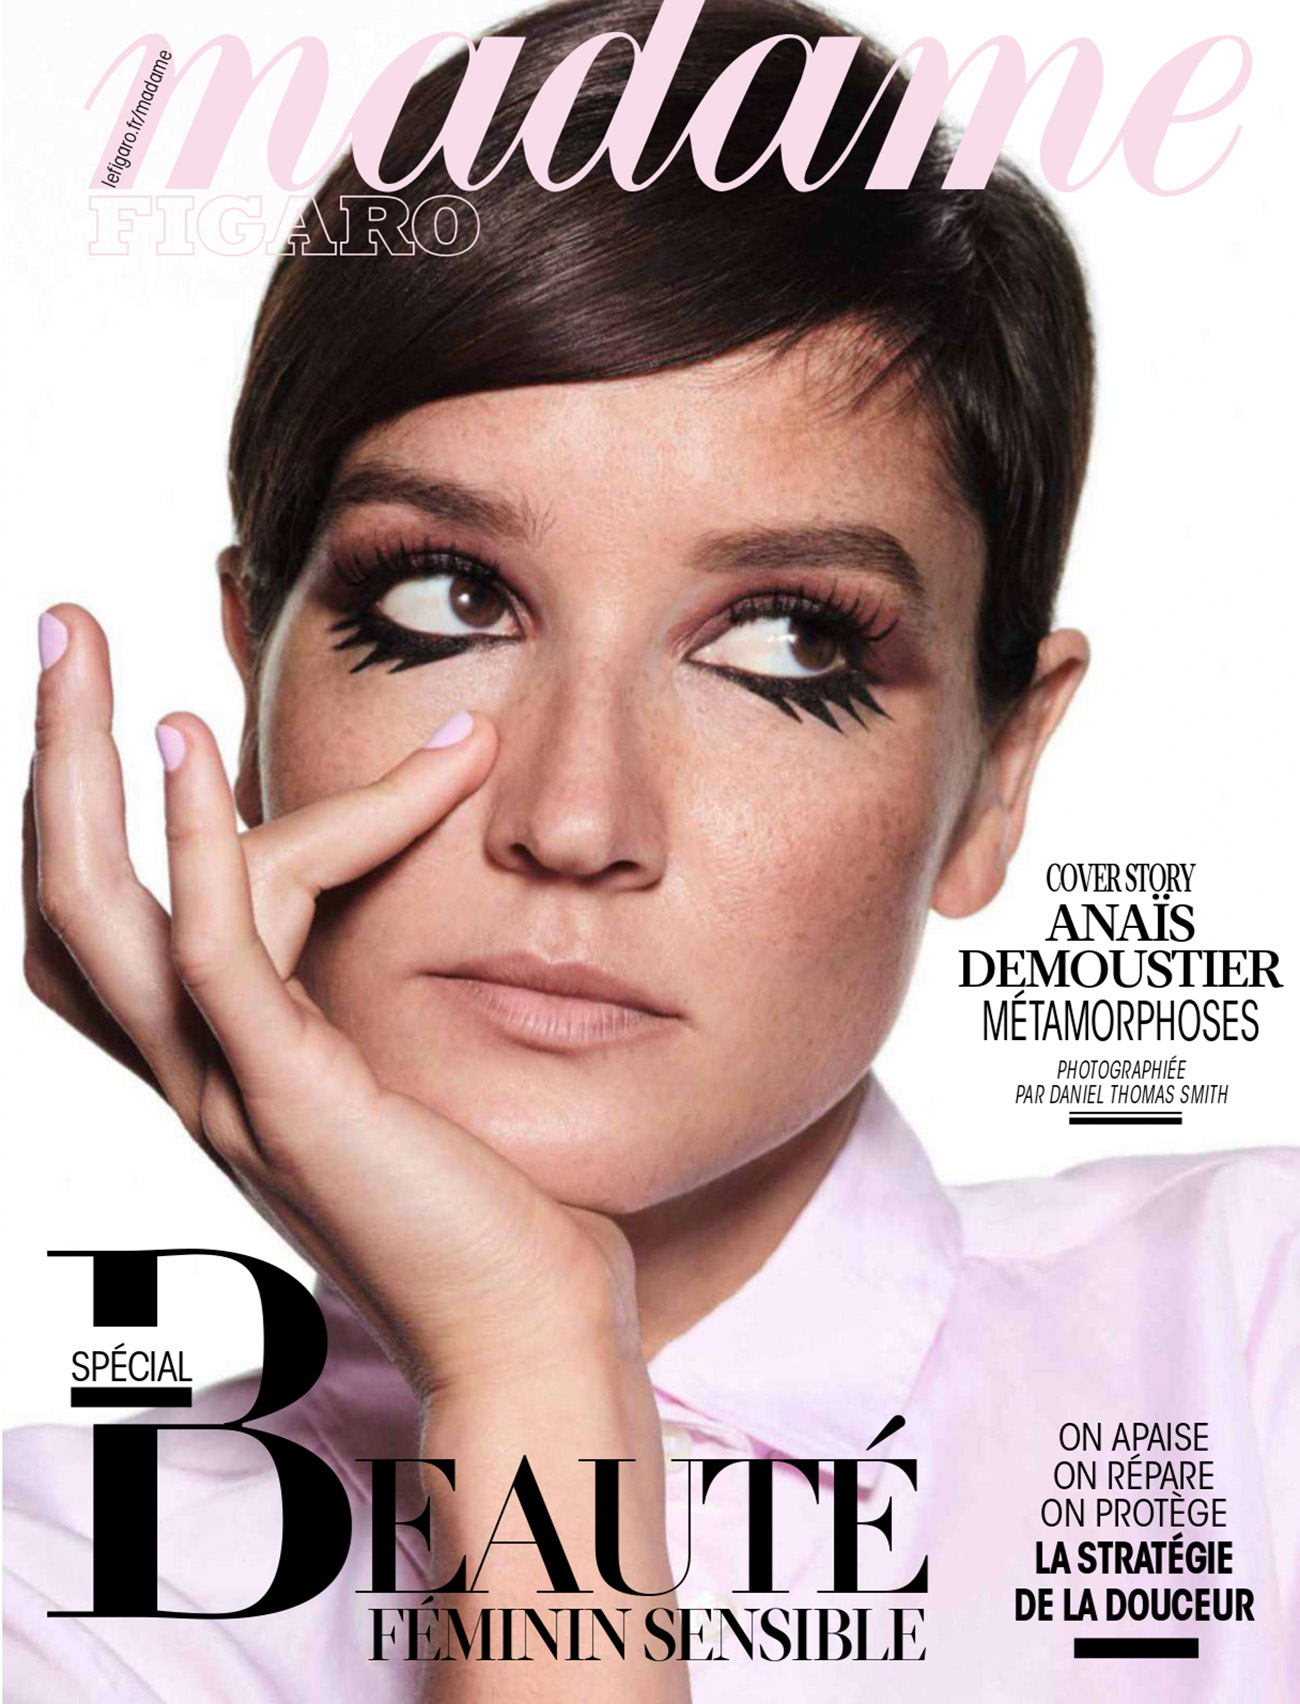 Anaïs Demoustier covers Madame Figaro October 22nd, 2021 by Daniel Thomas Smith